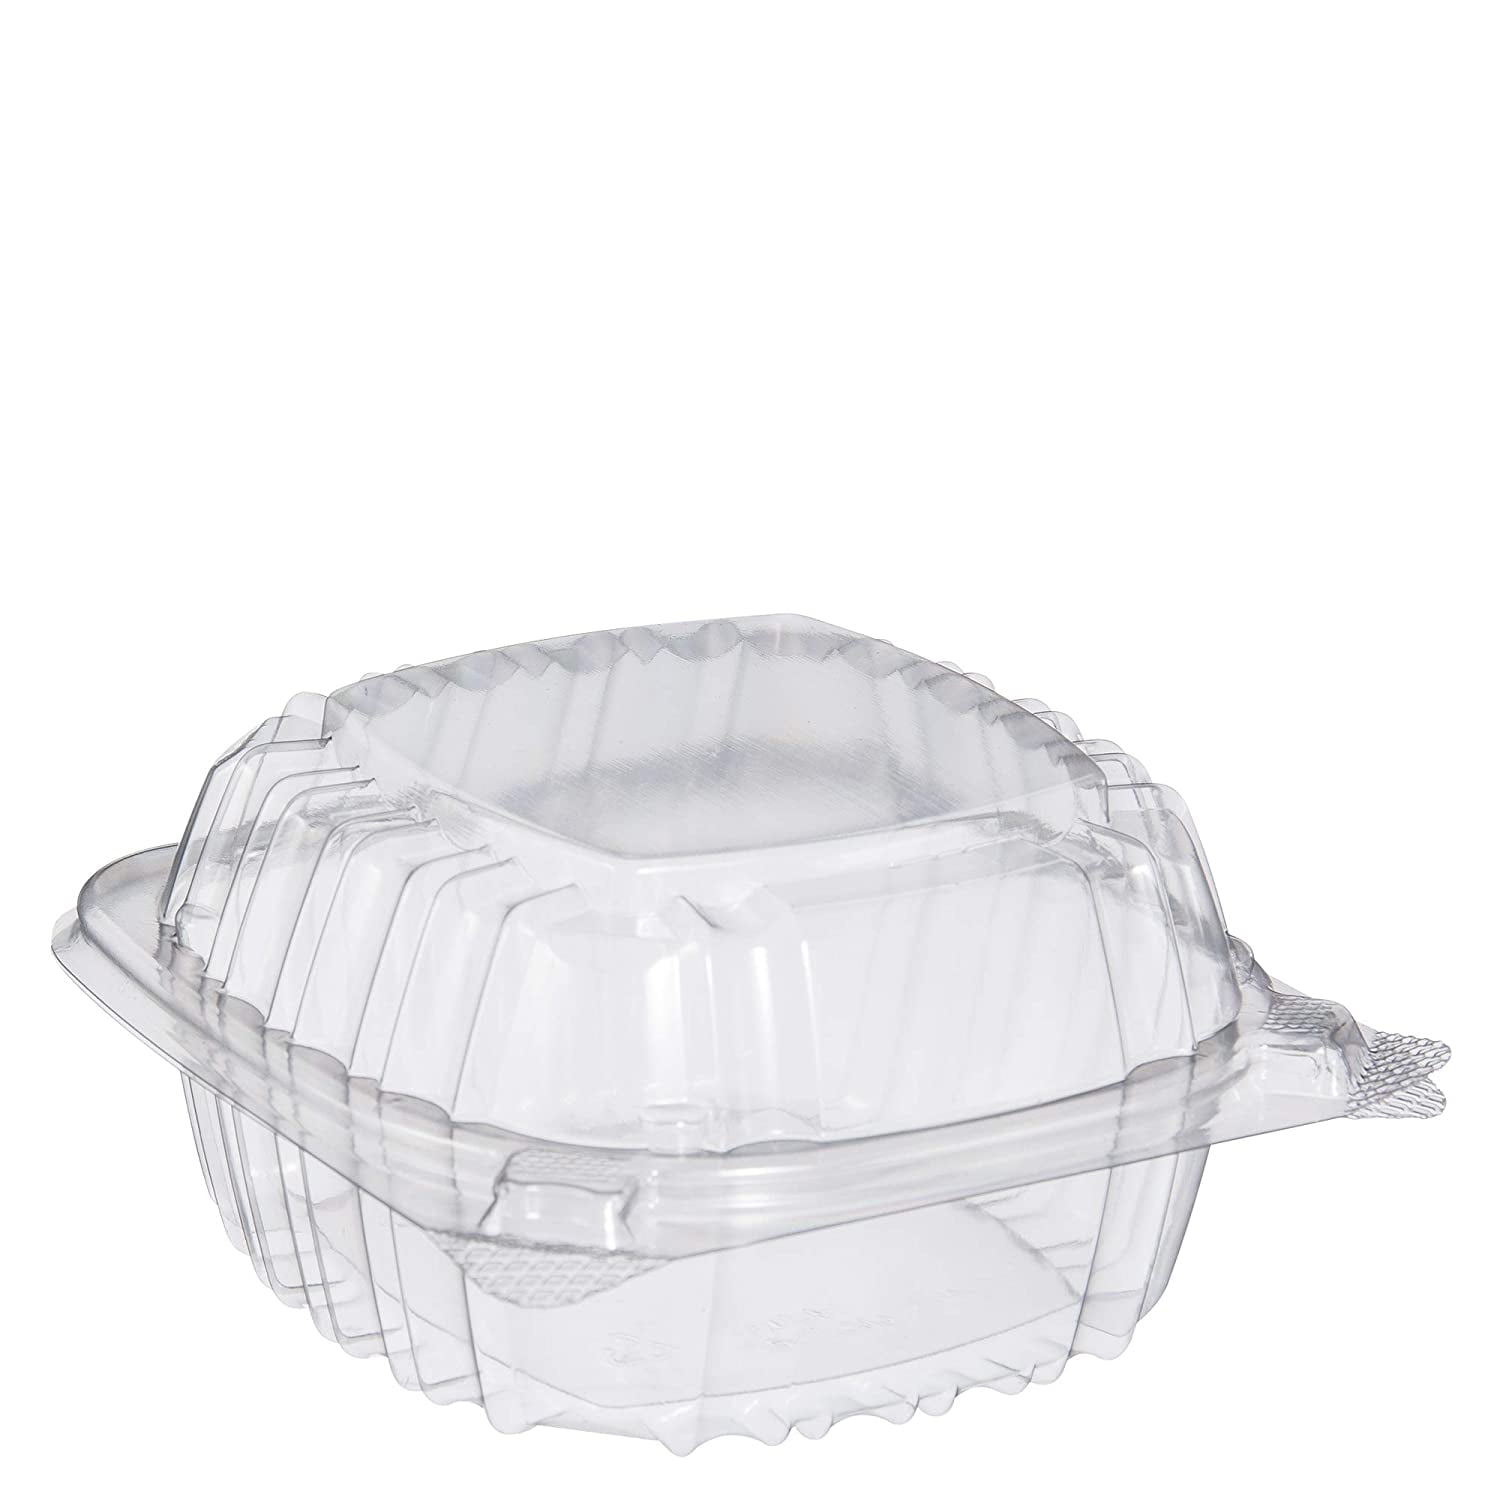 Deep Fill Plastic Sandwich Wedges x 500 REDUCED IN PRICE! 